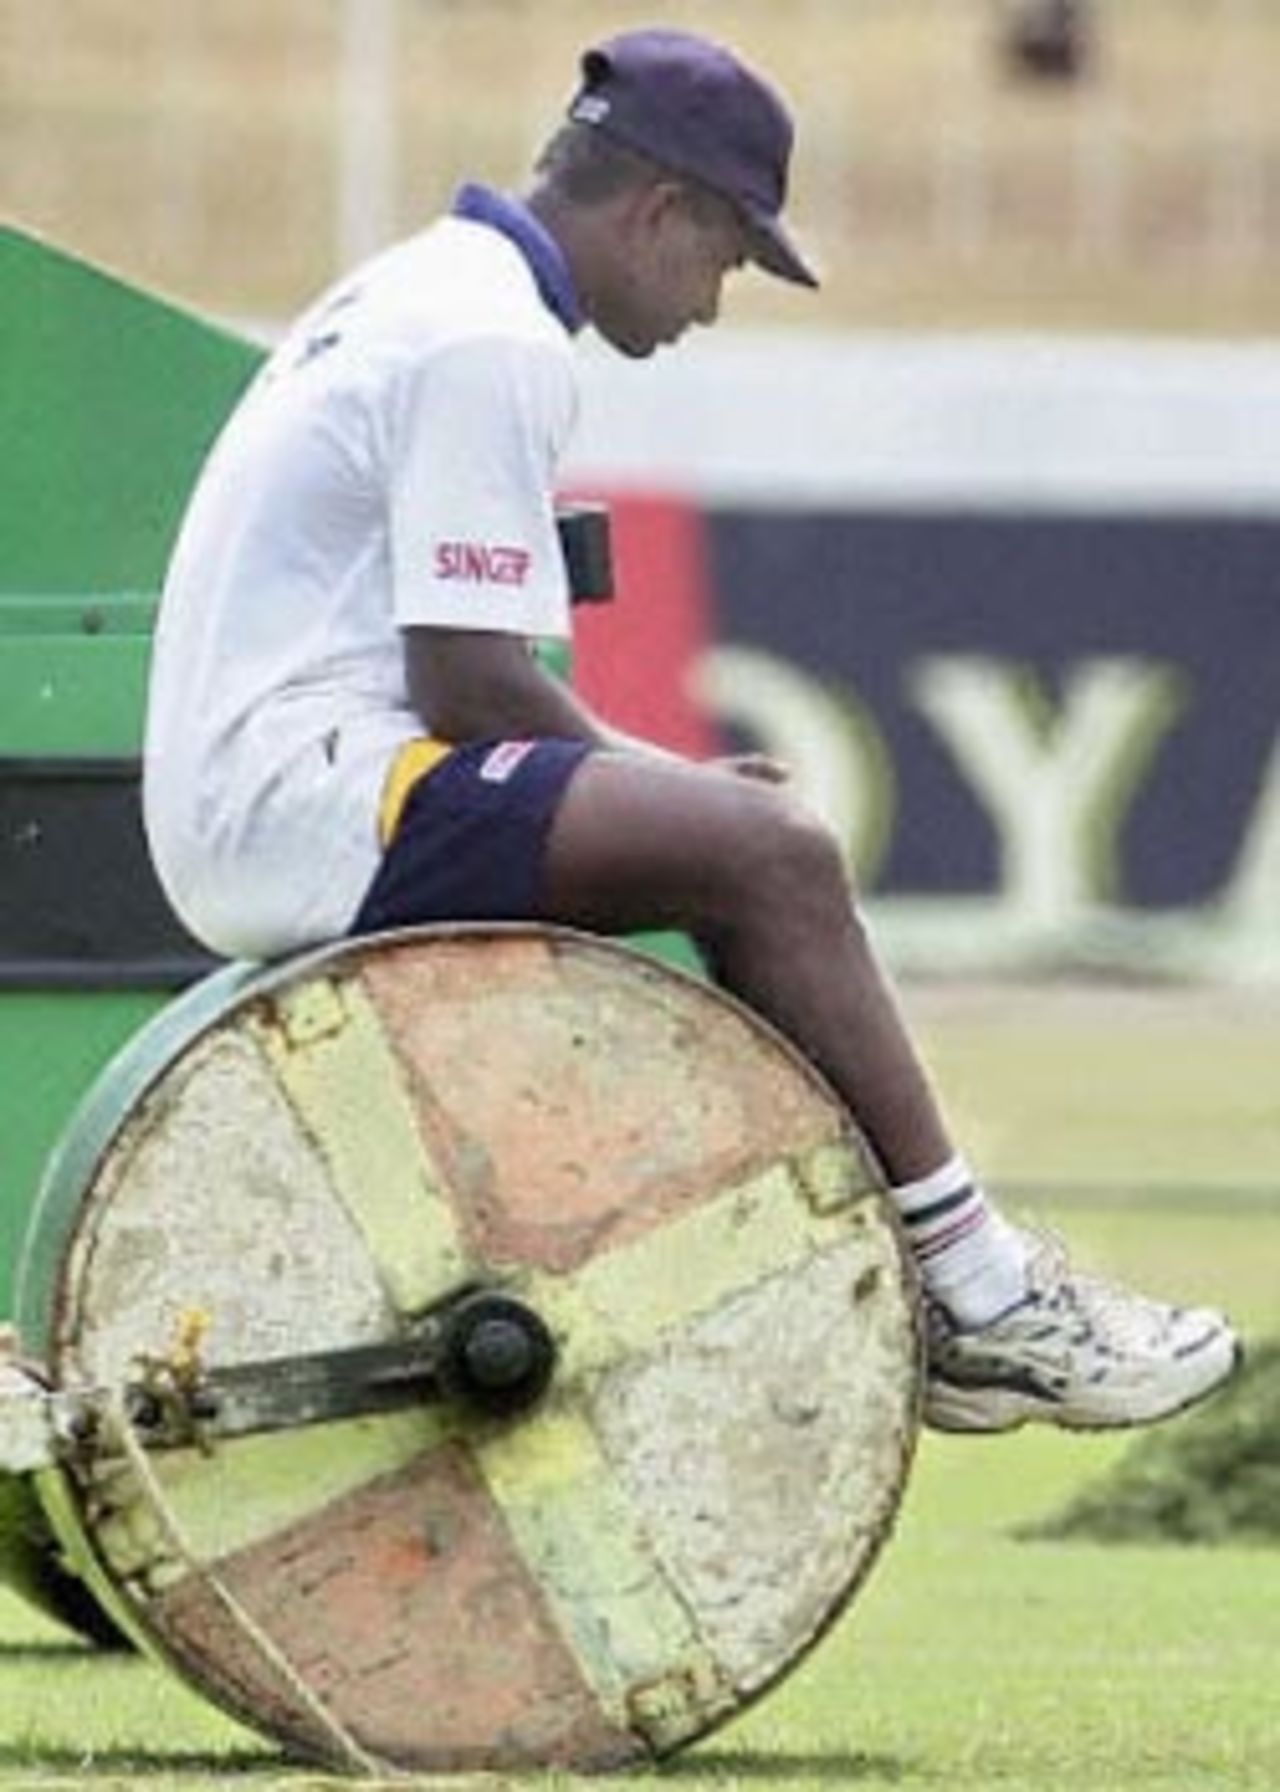 28 August 2001: India in Sri Lanka, Practice Session at the Sinhalese Sports Club Ground in Colombo before the 3rd Test